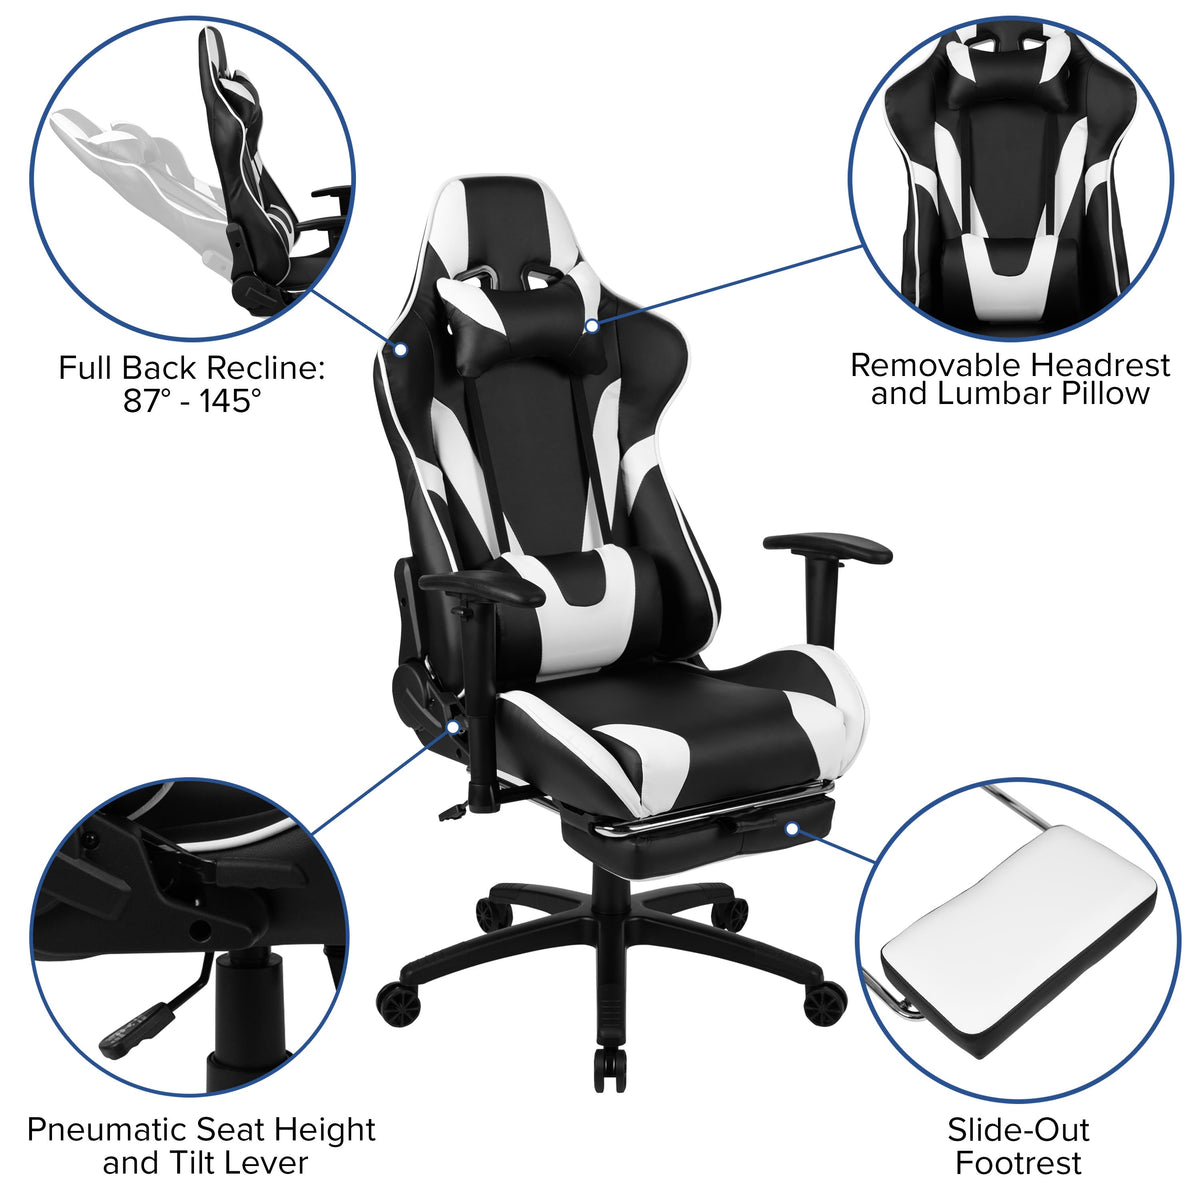 Black |#| Black Gaming Desk & Chair Set with Cup Holder, Headphone Hook, and Monitor Stand